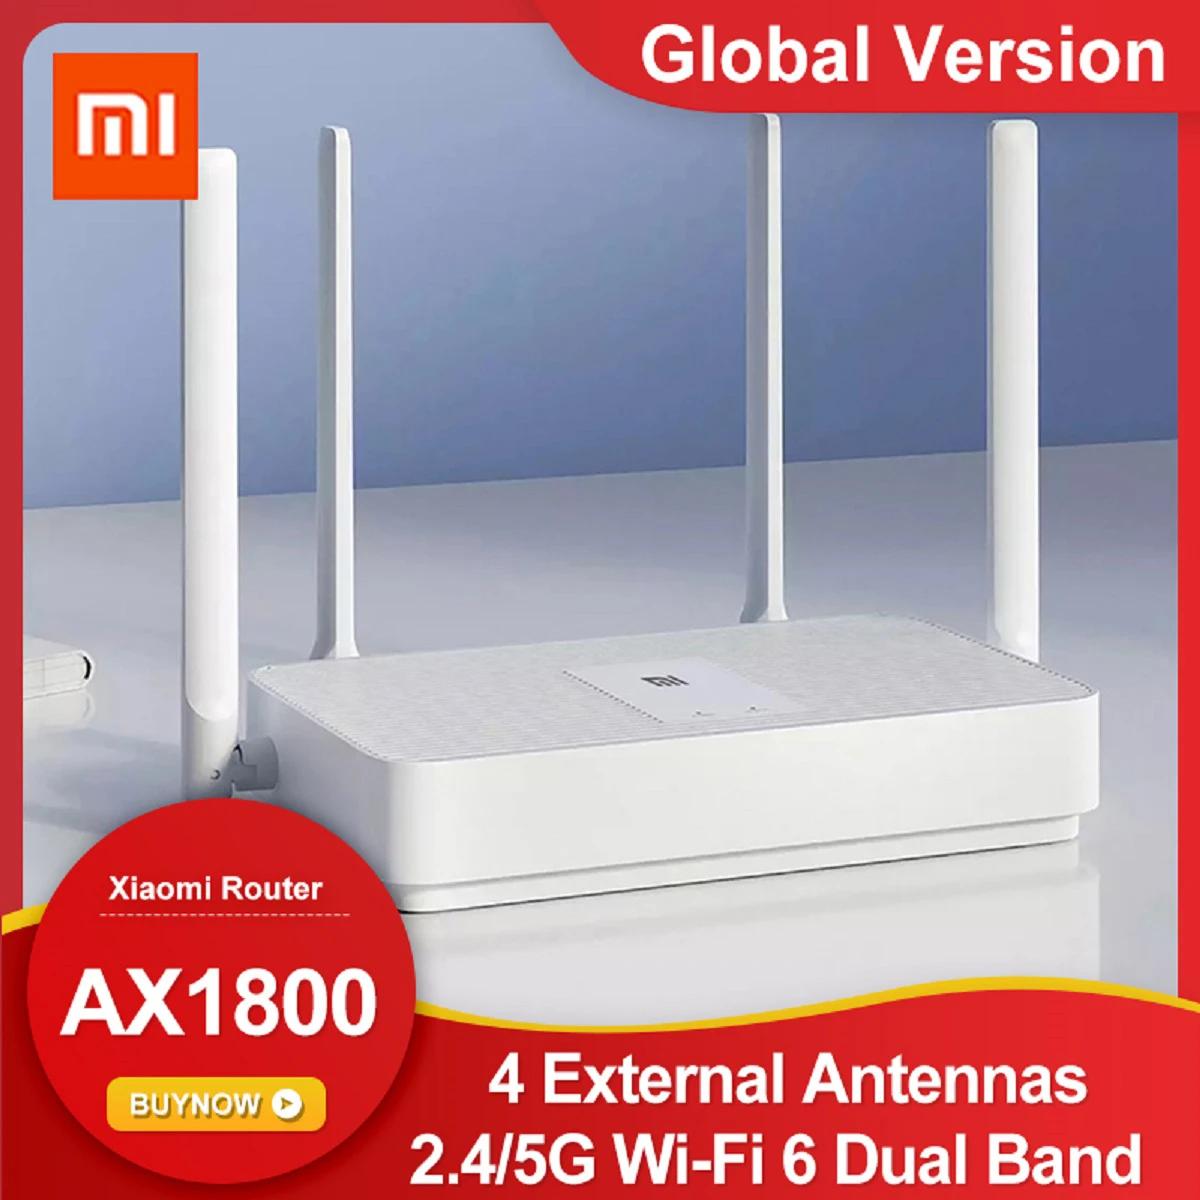 top rated wifi signal booster Global Version Xiaomi Router AX1800 Wi-Fi 6 Dual Band Wireless WiFi Router 5-Core Chip 4 External Antennas Signal Booster outdoor signal booster wifi Wireless Routers